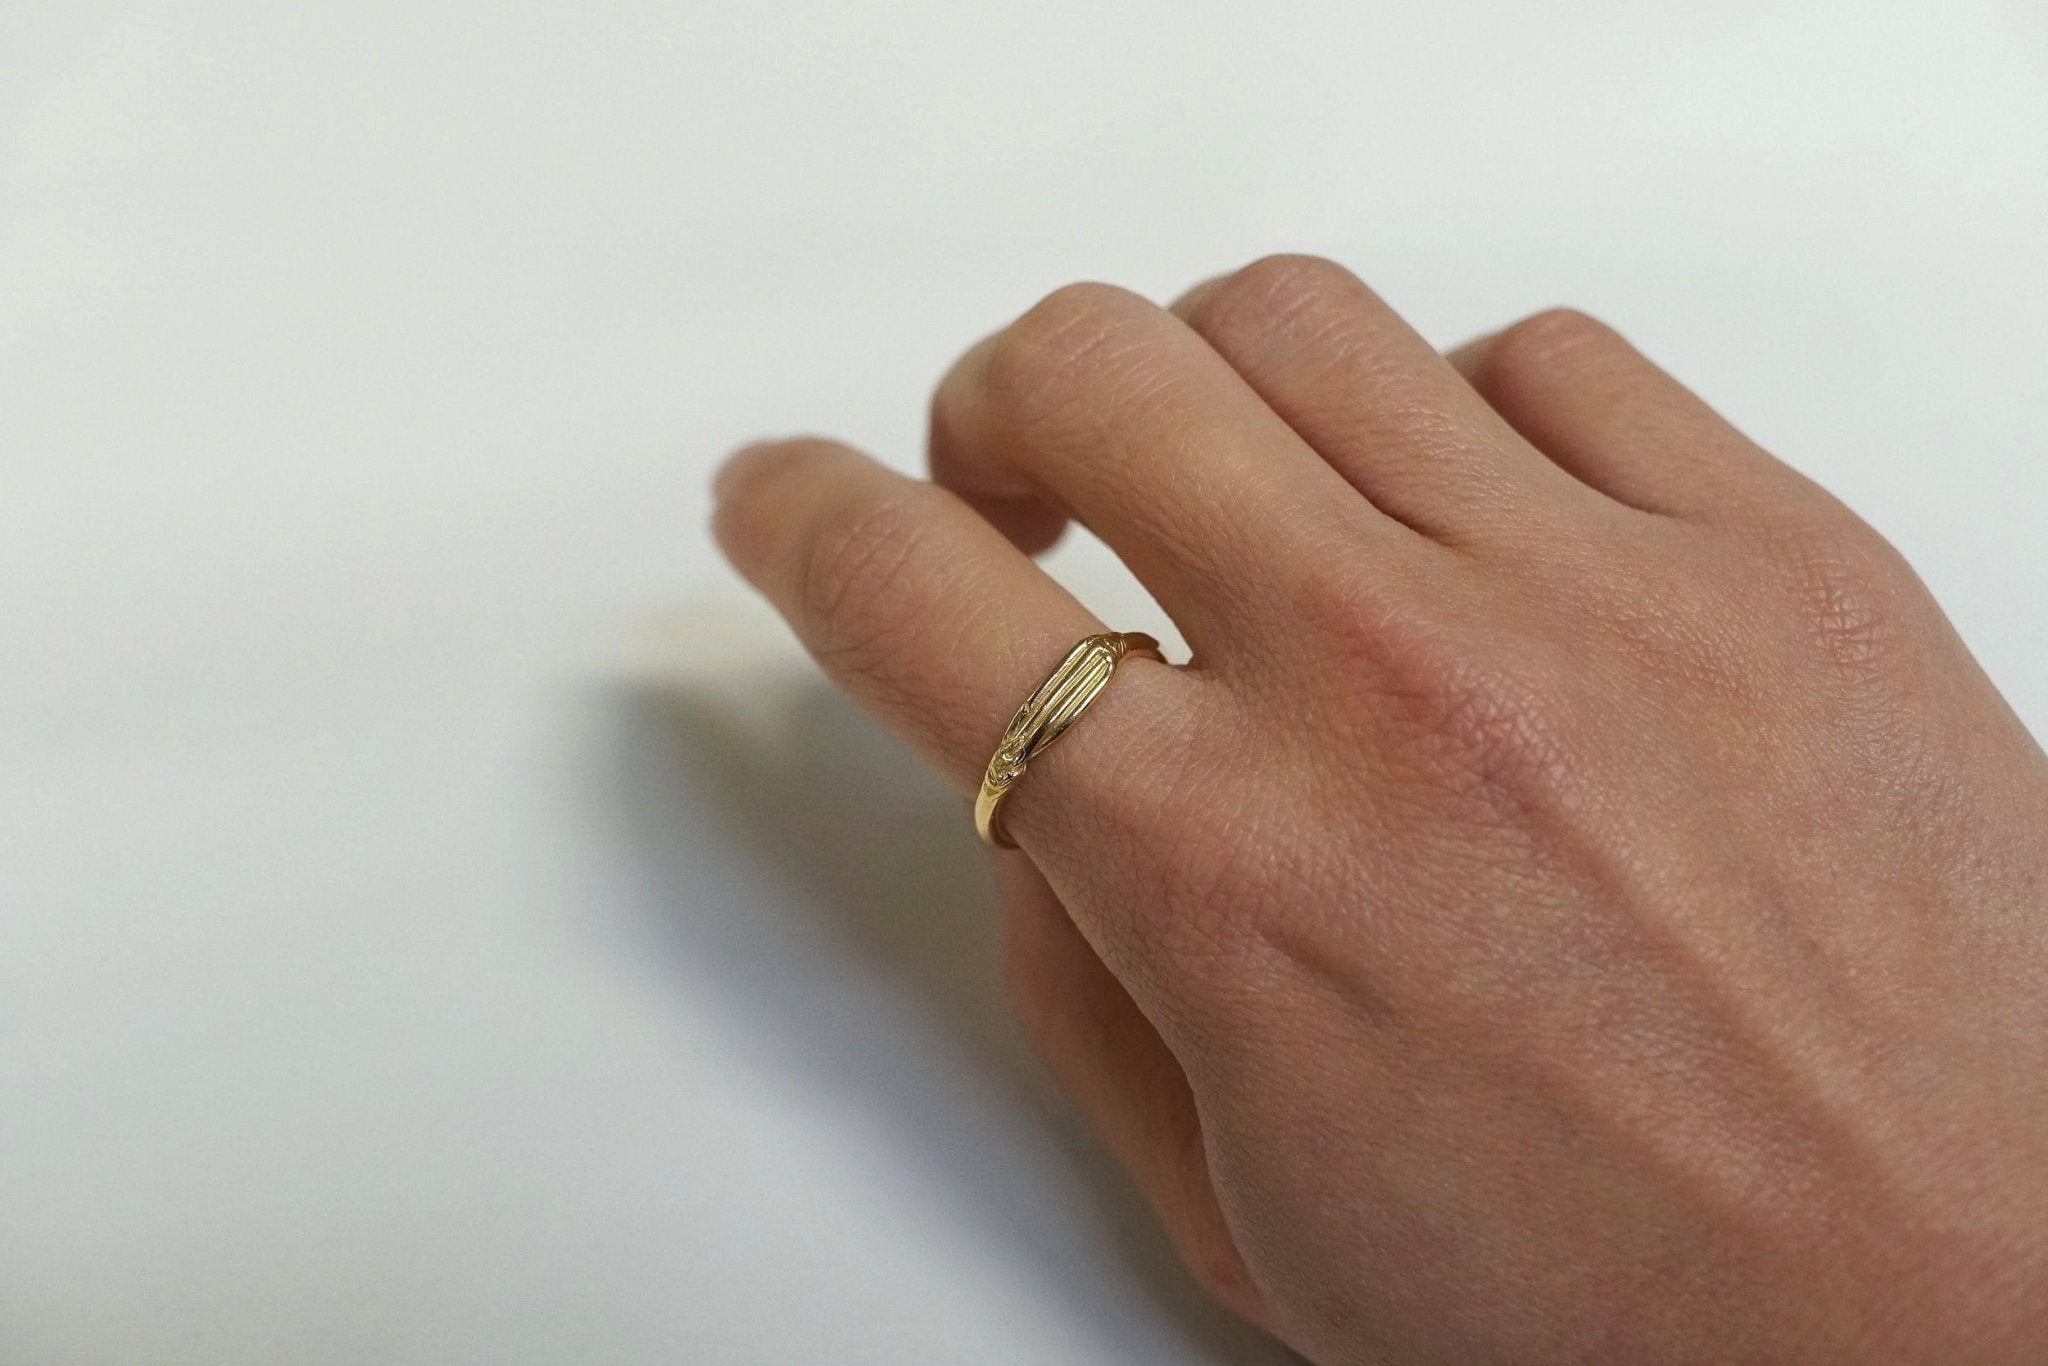 Lilly Buttrose - Wax Ring - 24k Gold Plated - Ensemble Studios